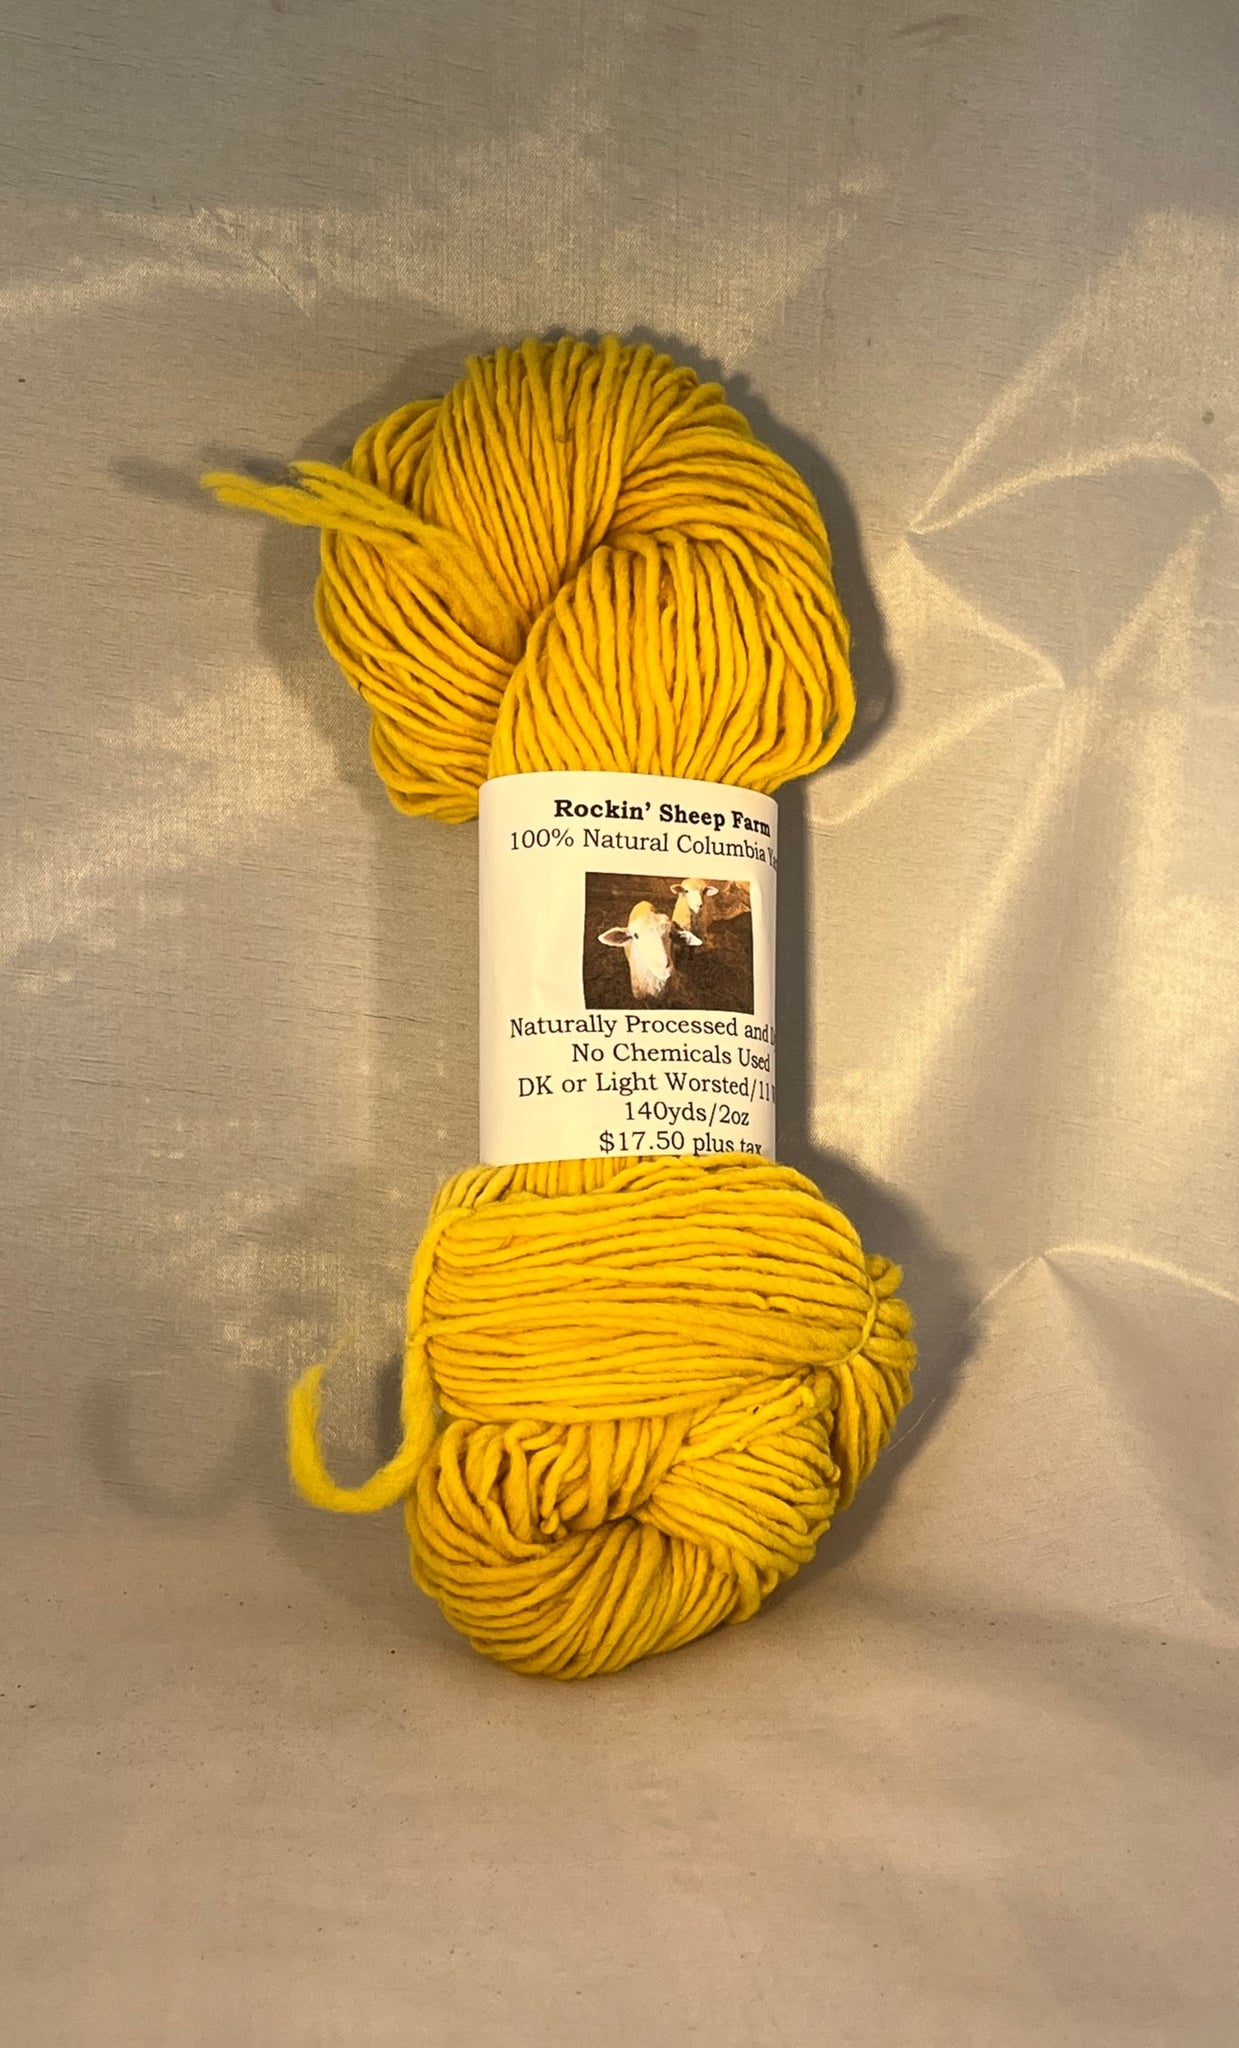 Worsted Weight Yarn – The Knitting Tree, L.A.